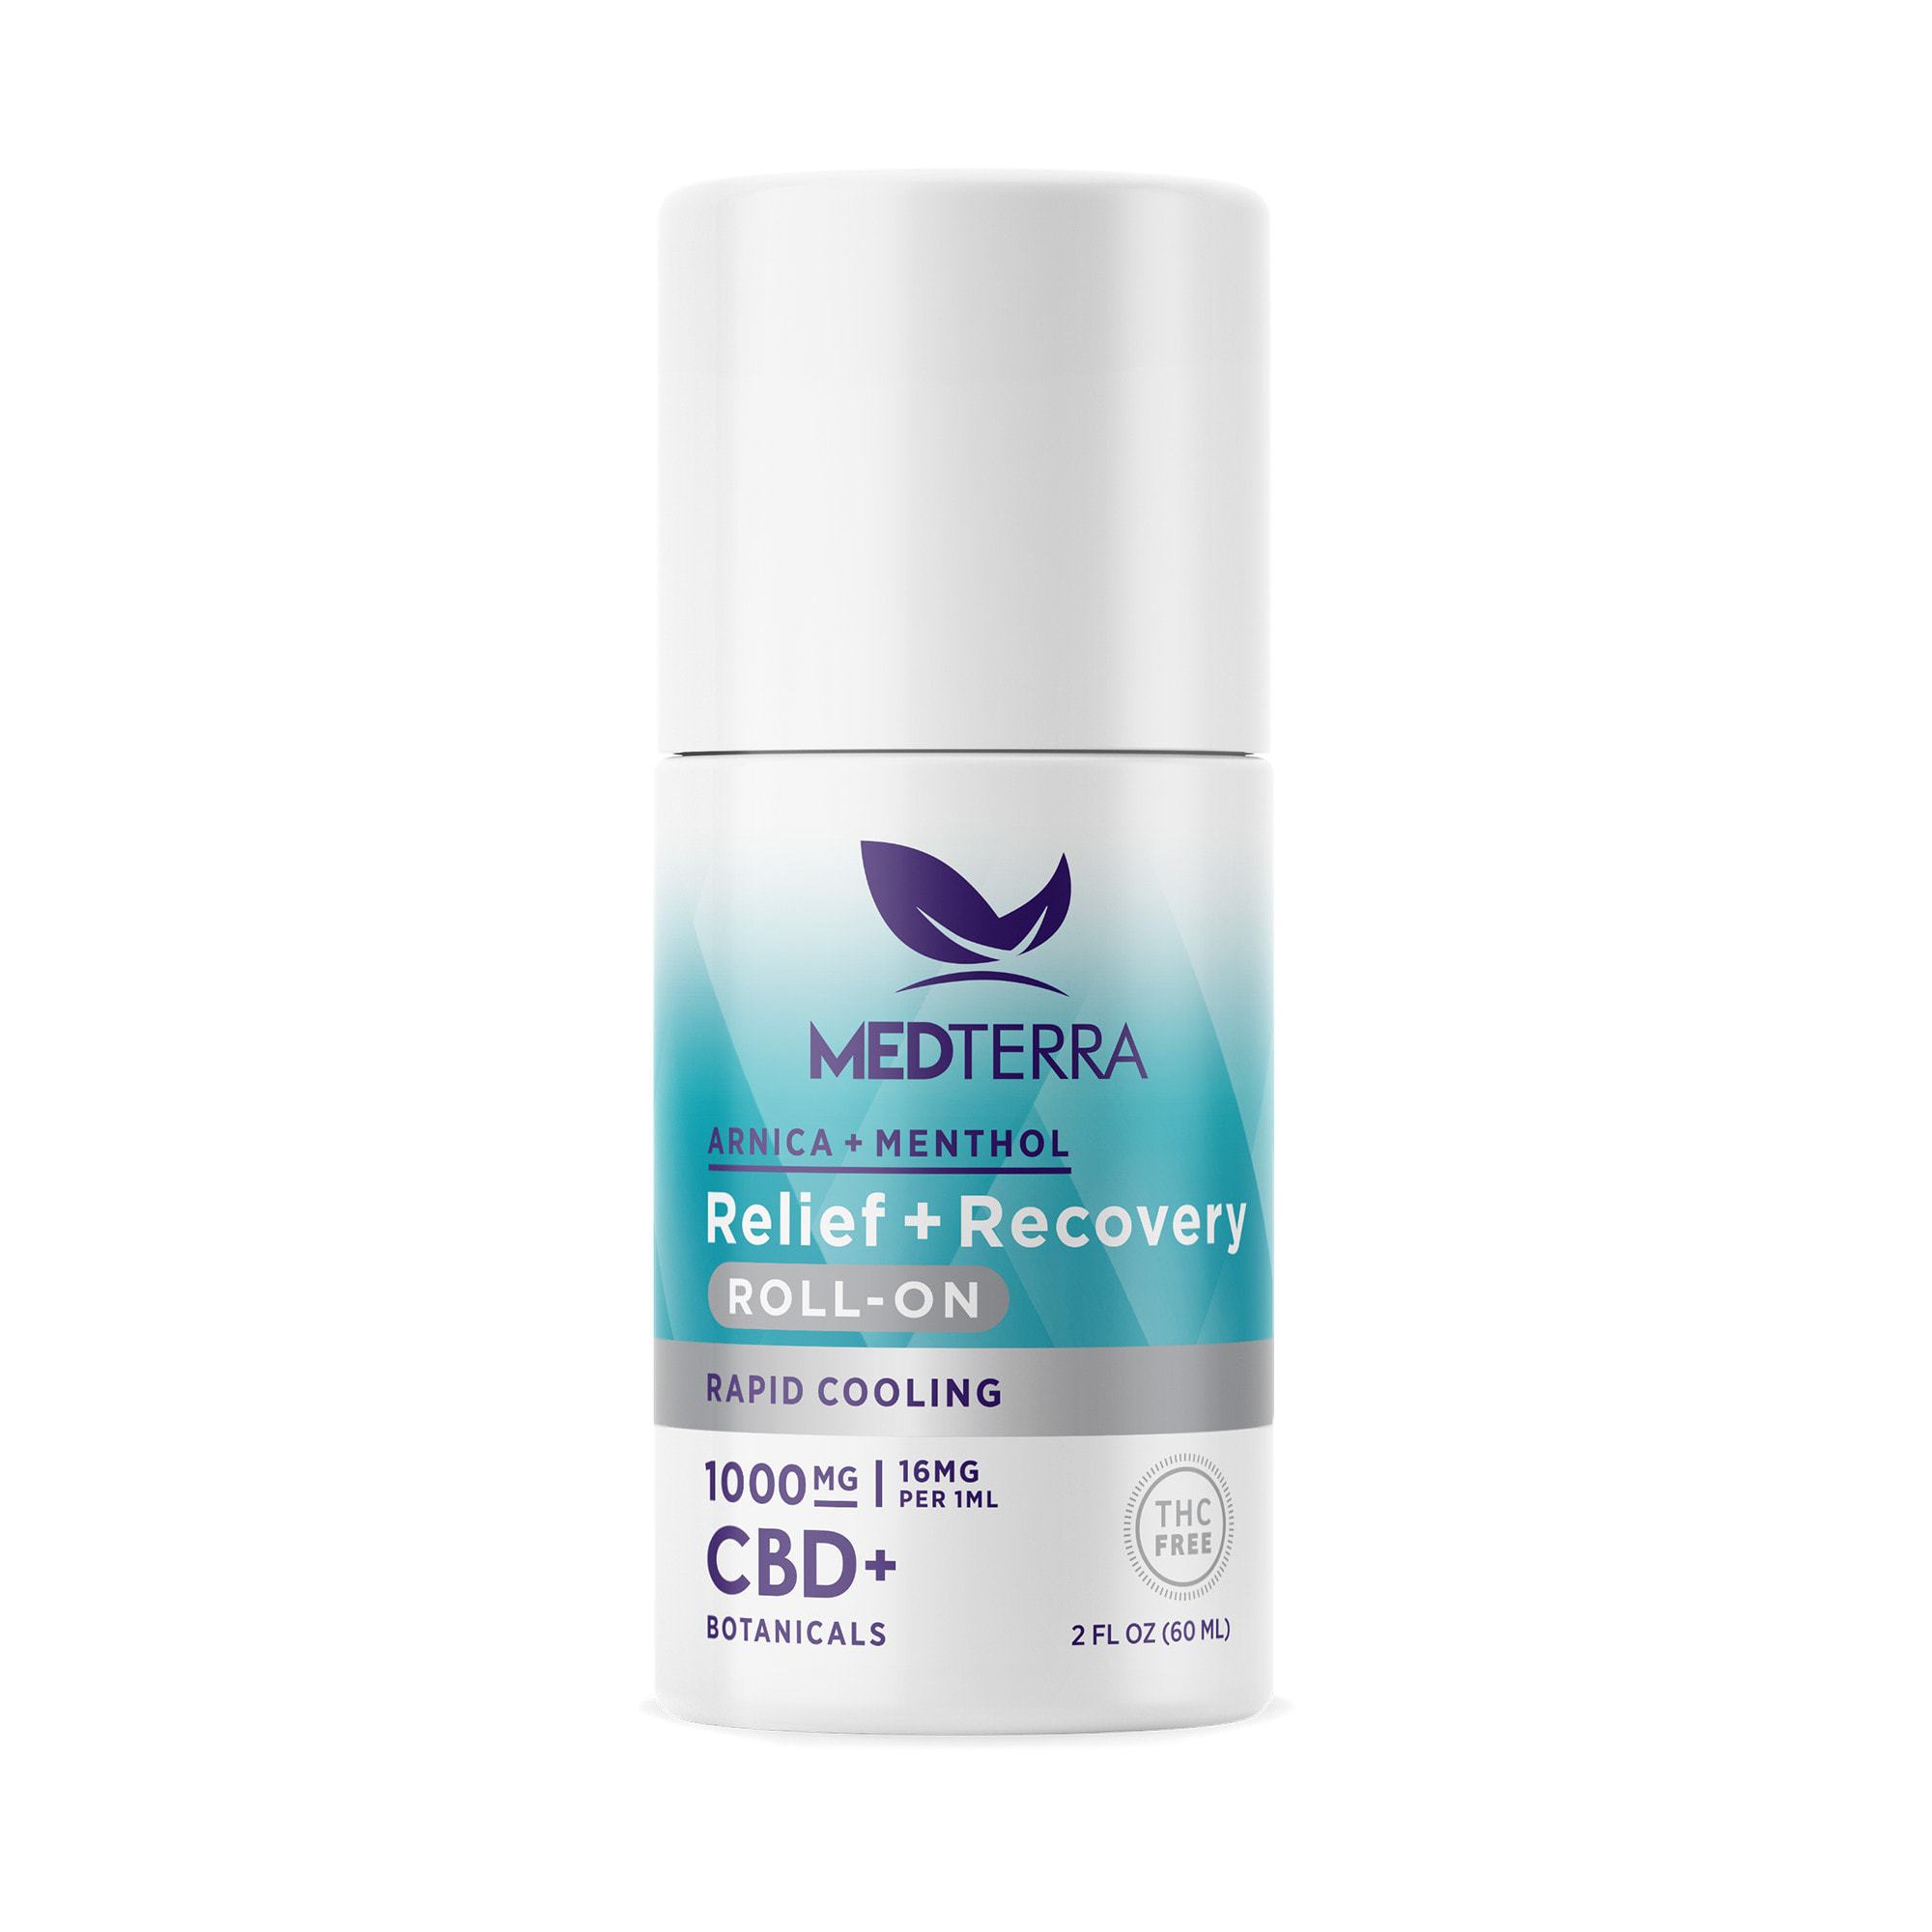 Medterra, Relief + Recovery CBD Roll On, Isolate THC-Free, 2oz, 1000mg CBD